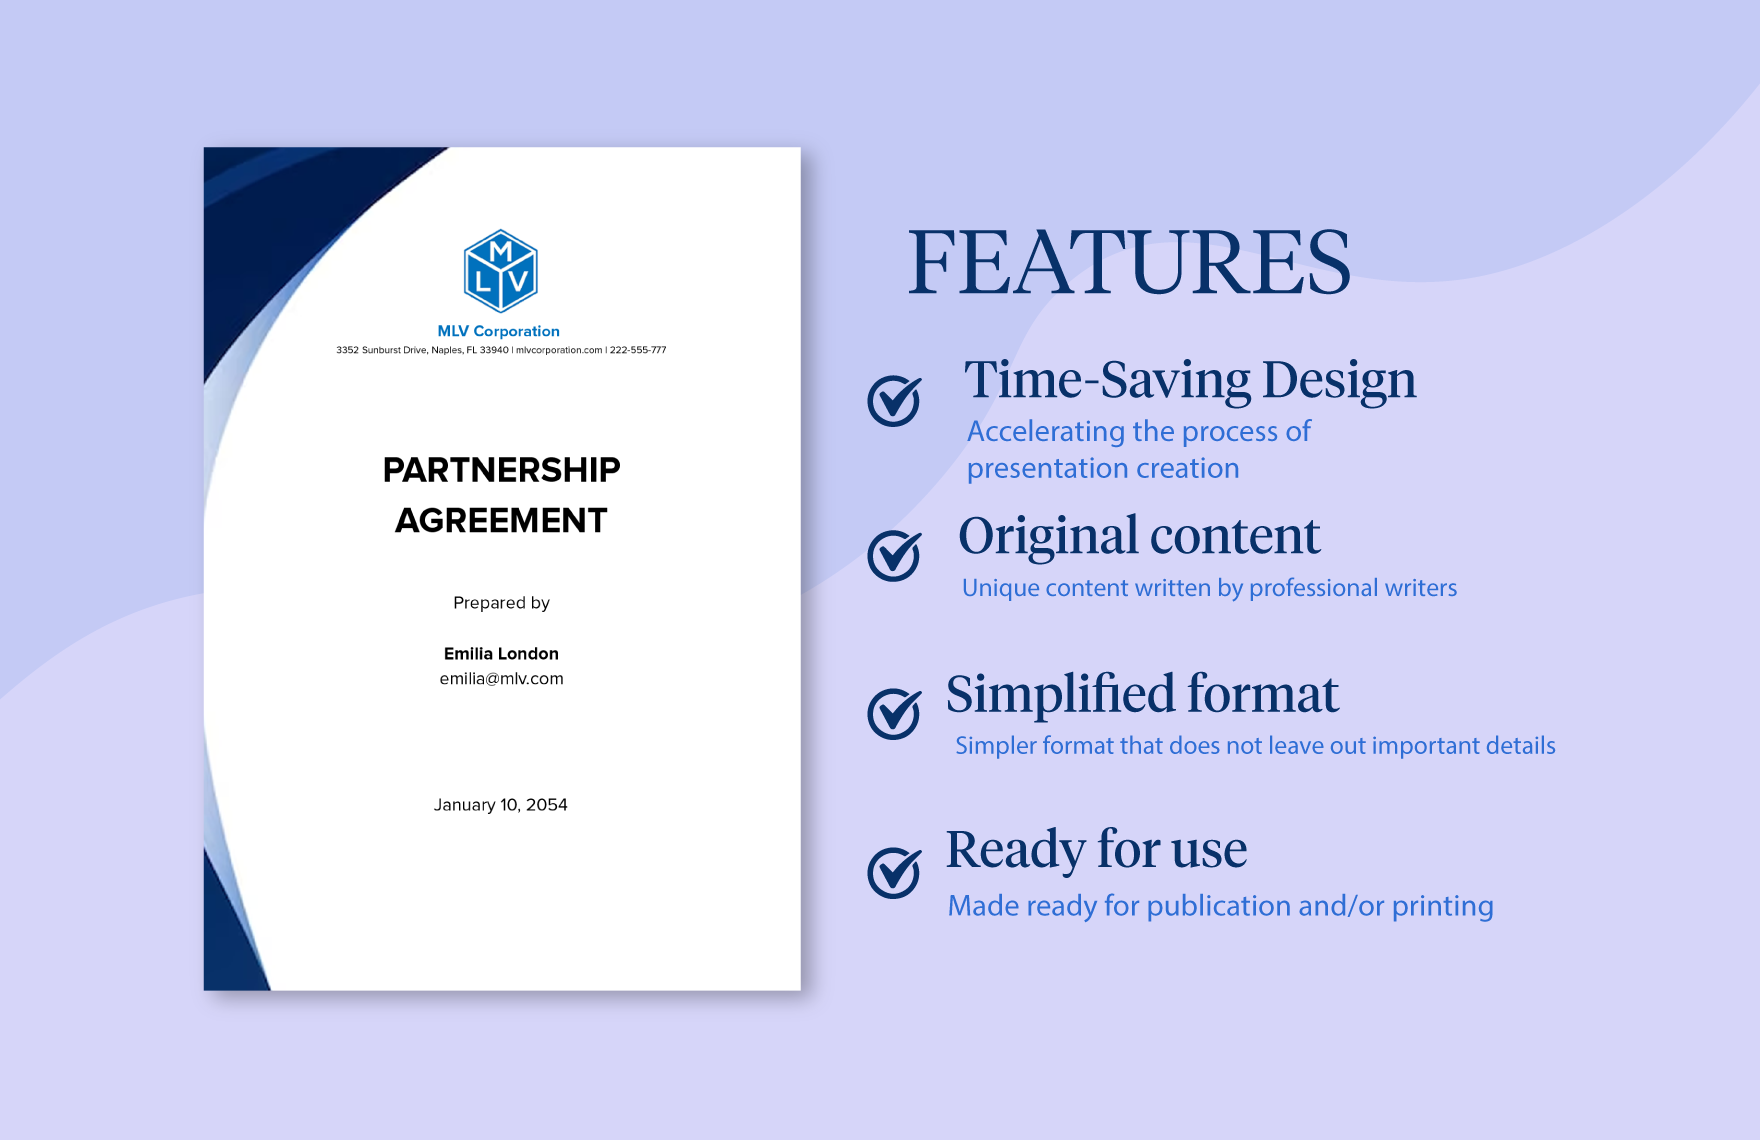 Partnership Investor Contract Agreement Template